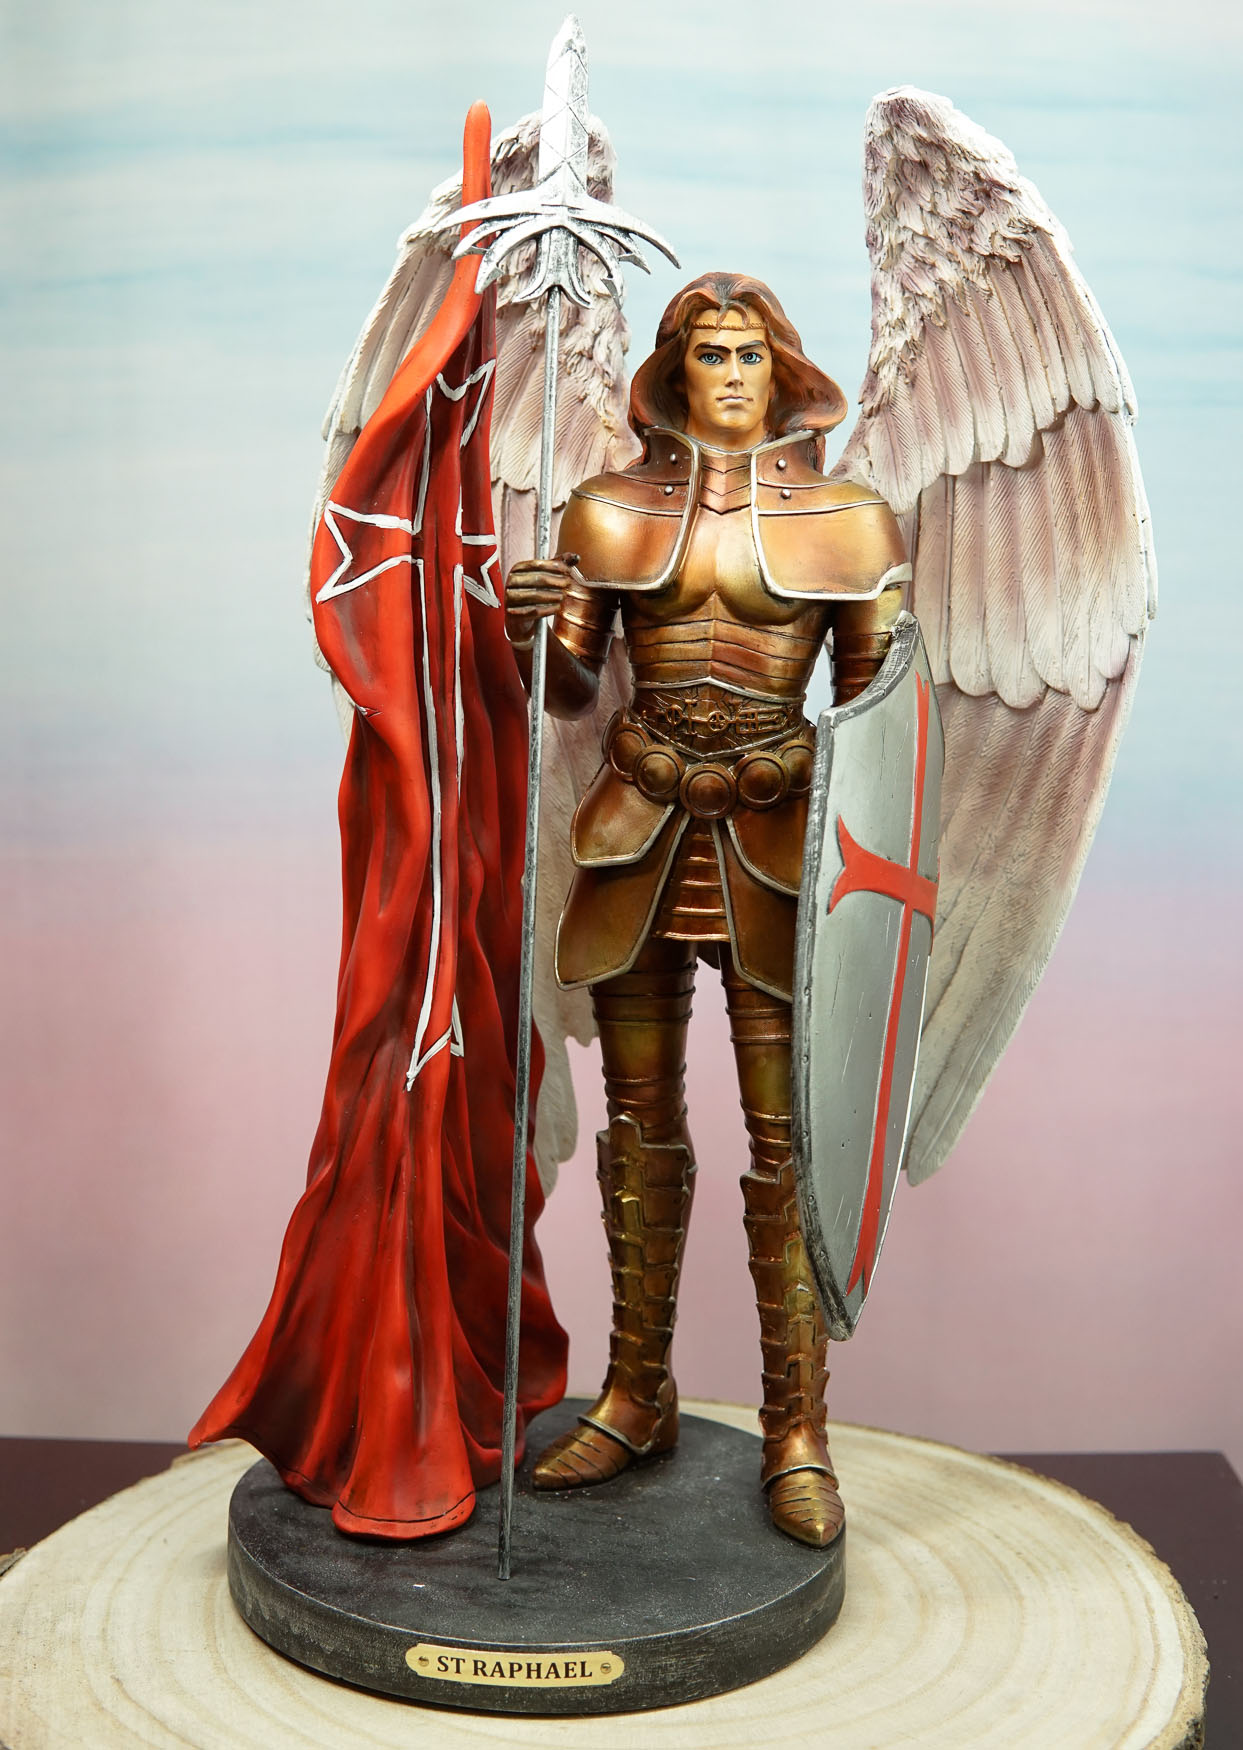 Ebros Large Archangel Saint Raphael With Spear And Faith Shield Statue - image 1 of 7